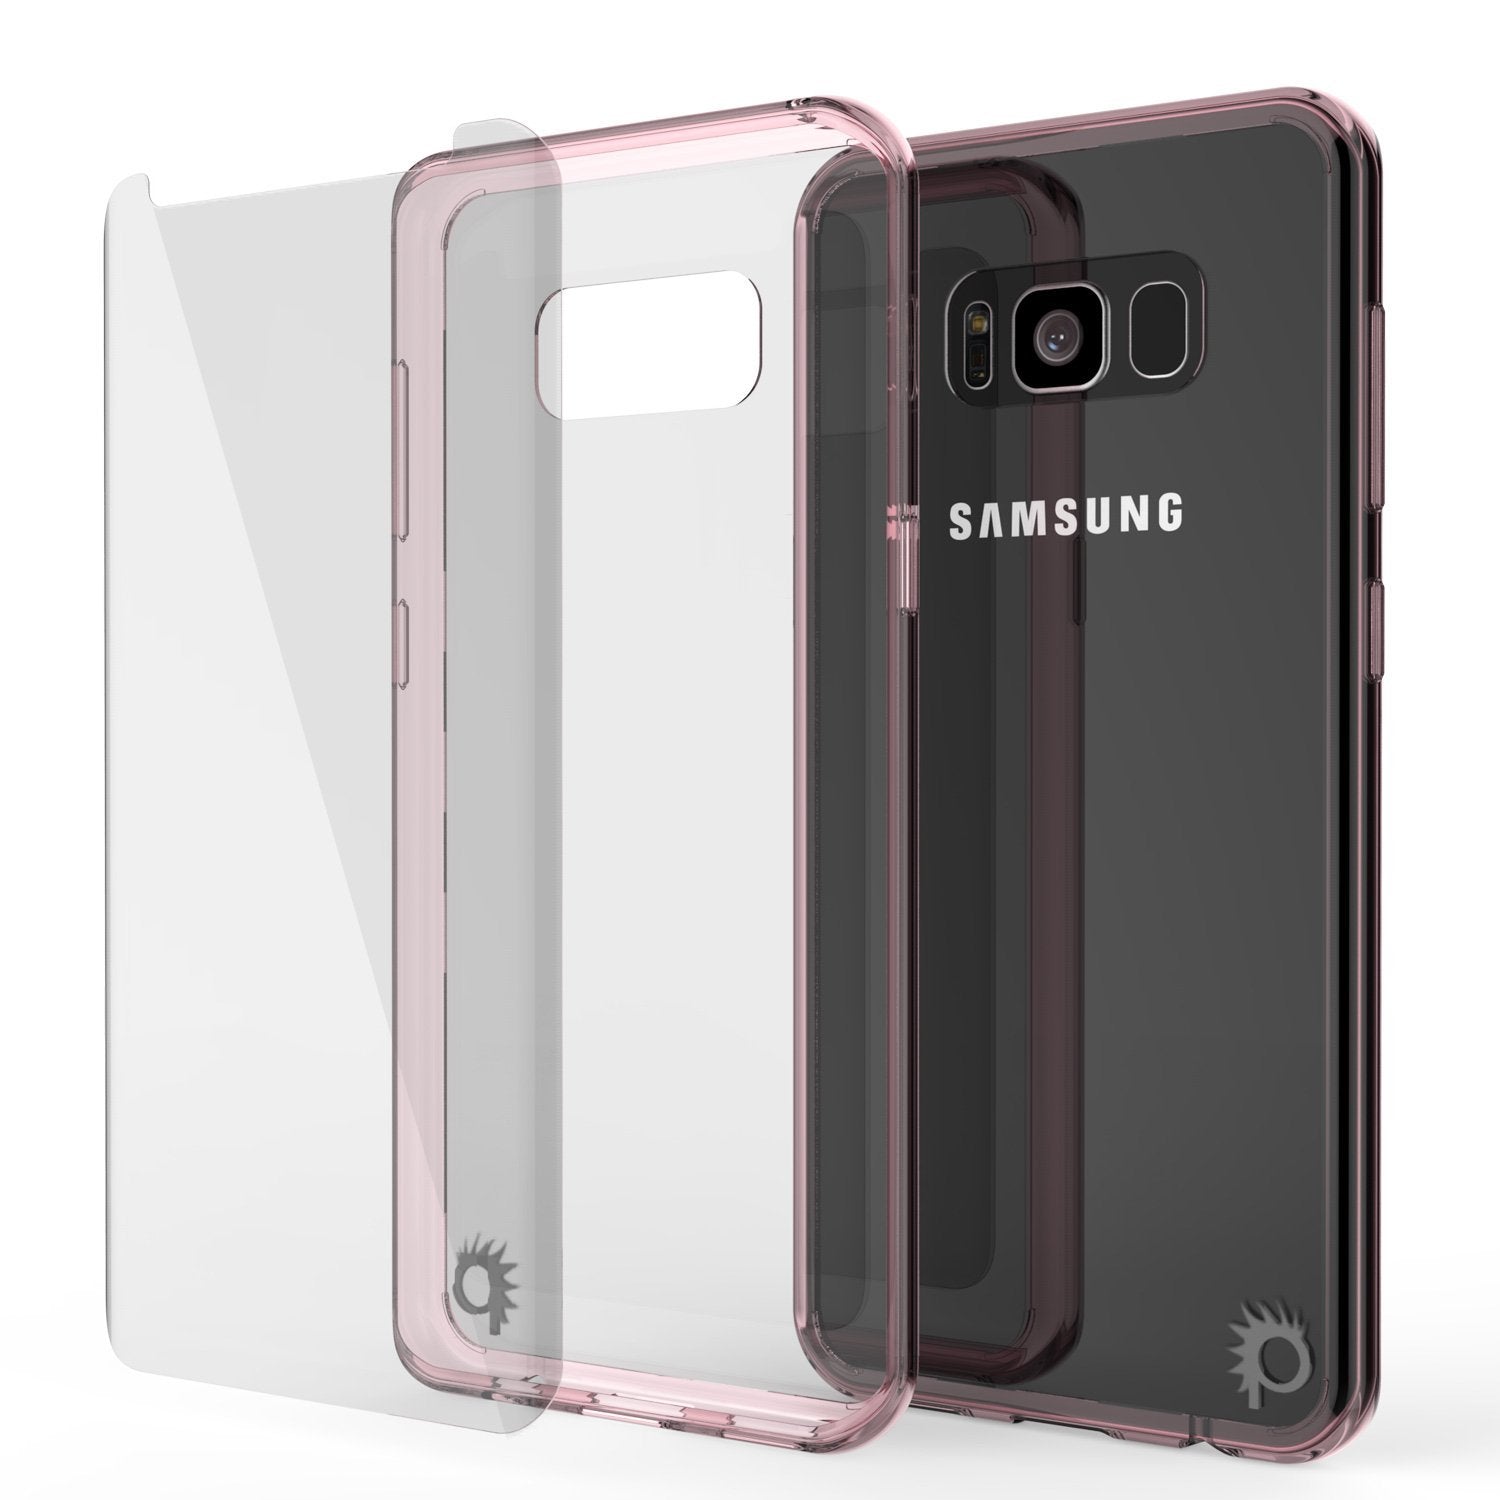 S8 Case Punkcase® LUCID 2.0 Crystal Pink Series w/ PUNK SHIELD Screen Protector | Ultra Fit